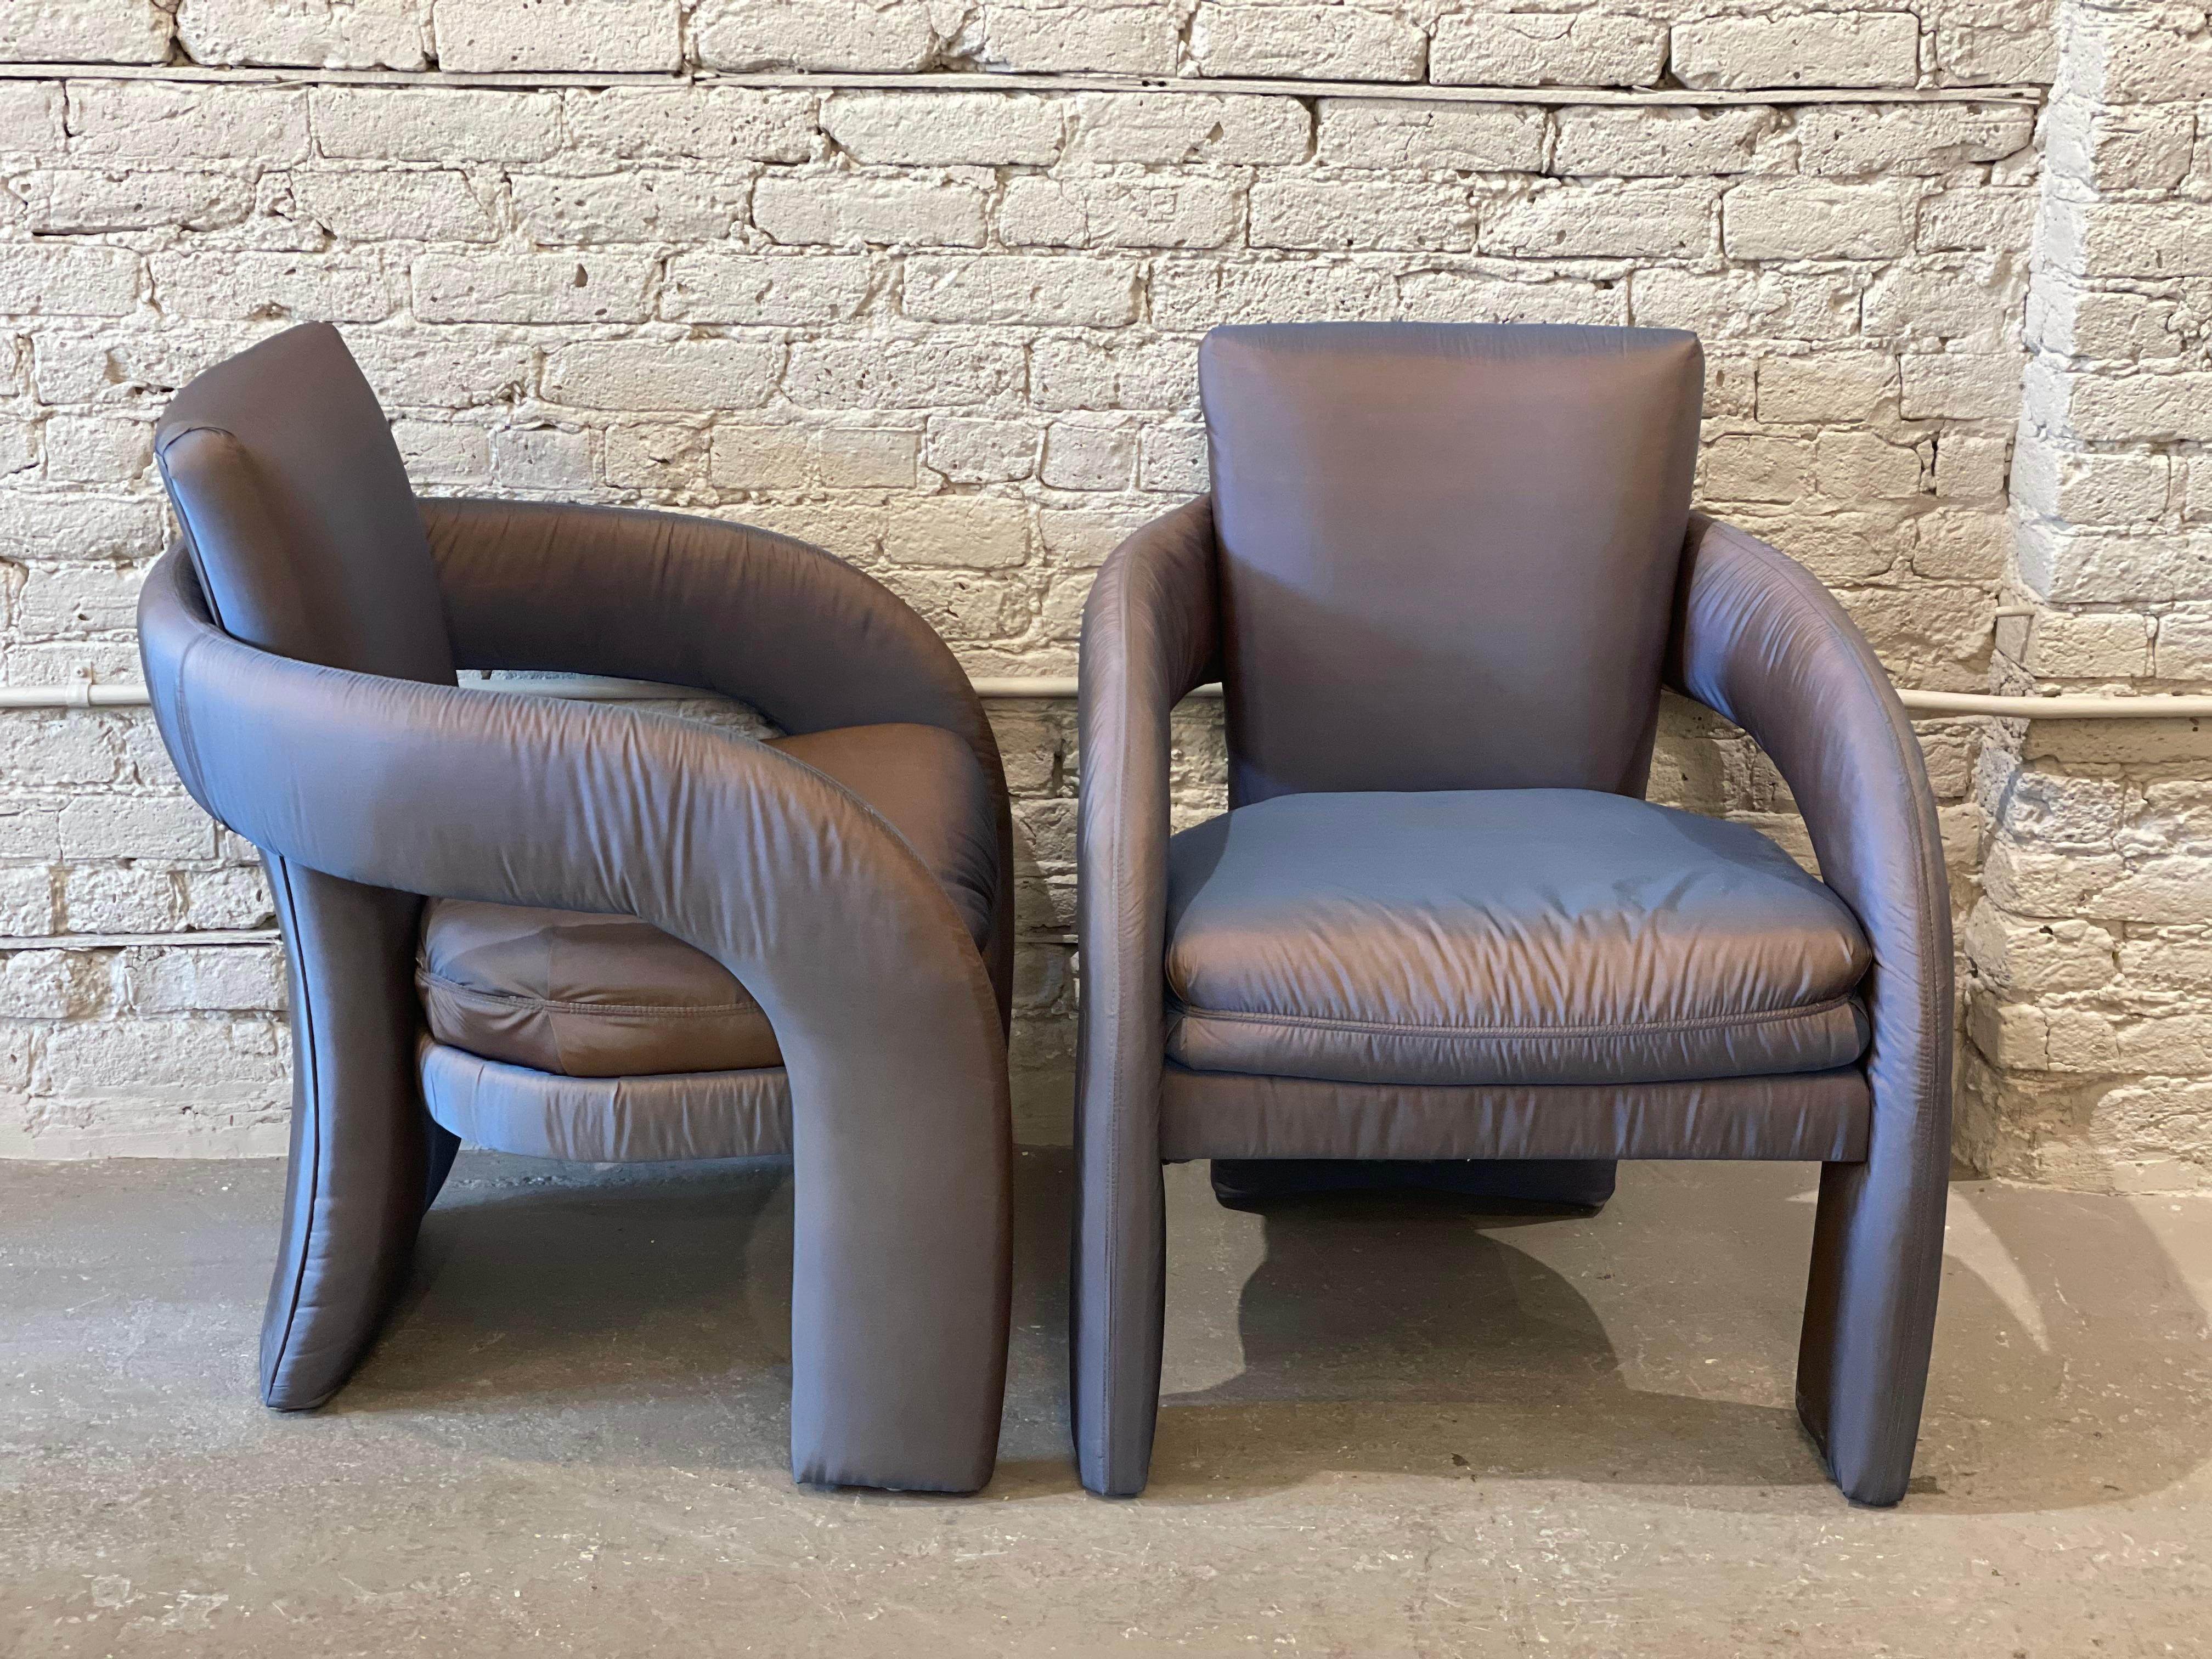 Patience is a virtue - and so worth the wait for these darling chairs. The seller took no less than a month to seal the deal:(

As cool as these are, I would like to suggest using them as formal living room chairs or dining table chairs. The seat is